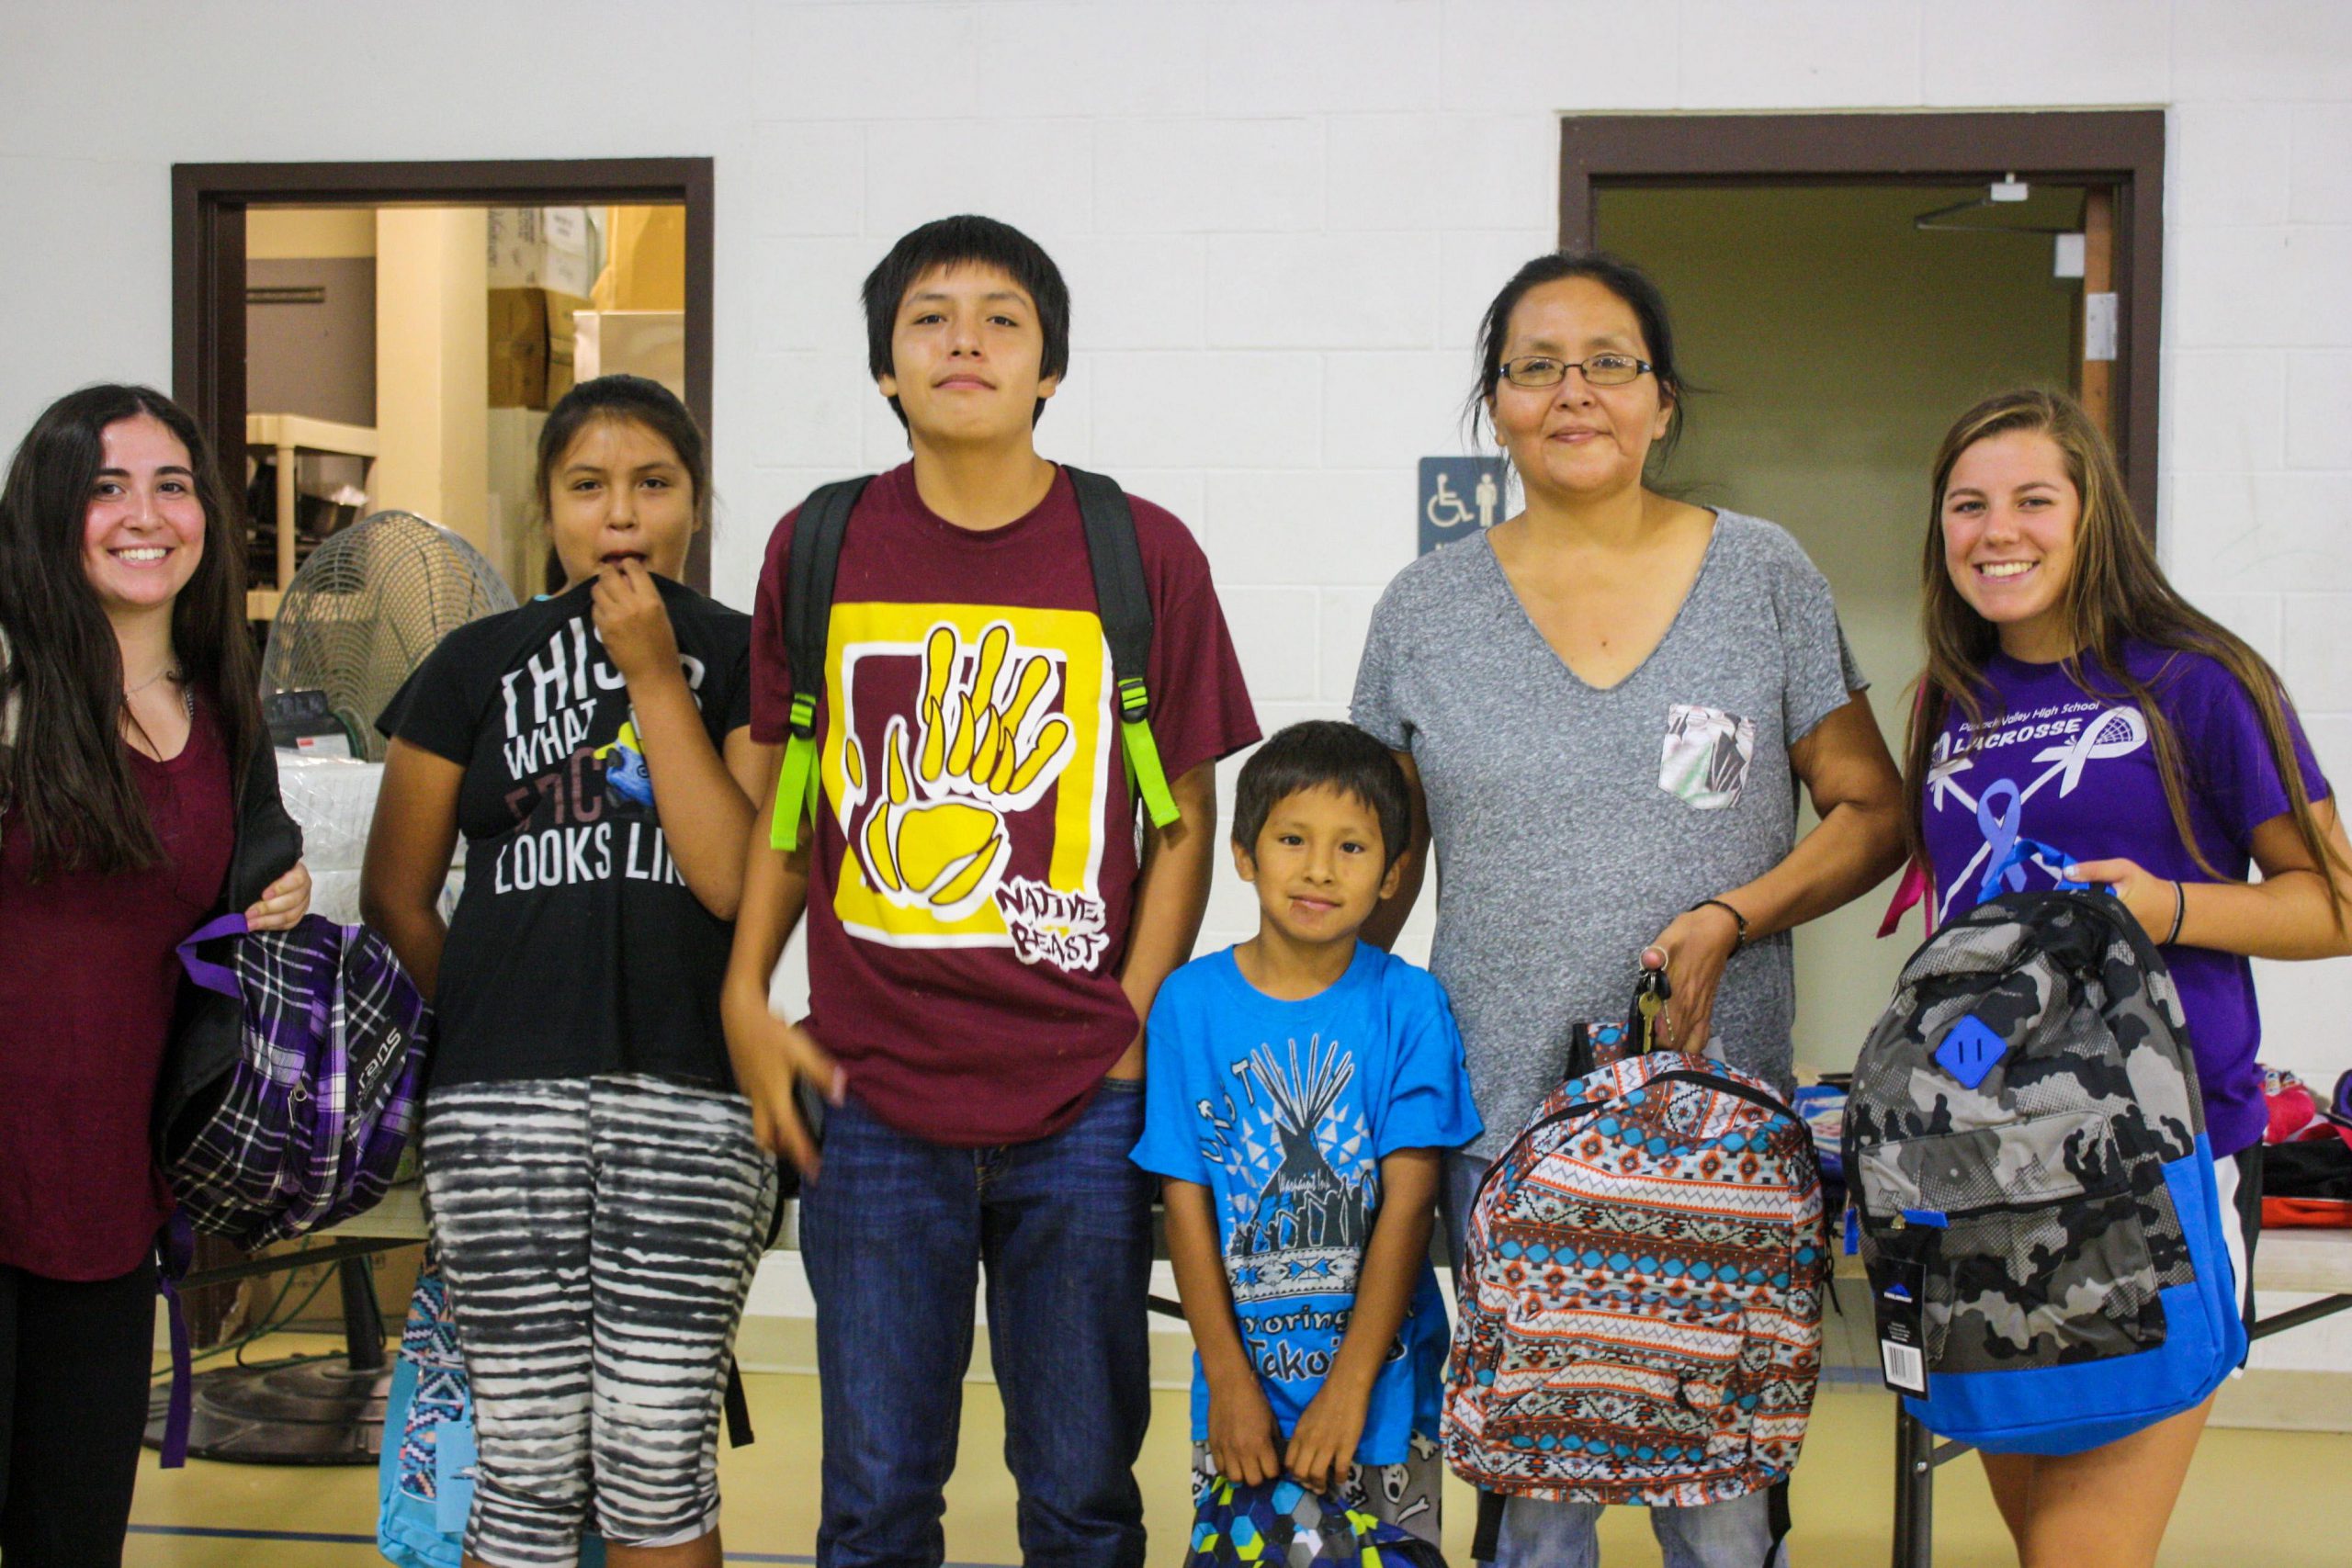 Cheyenne River Youth Project